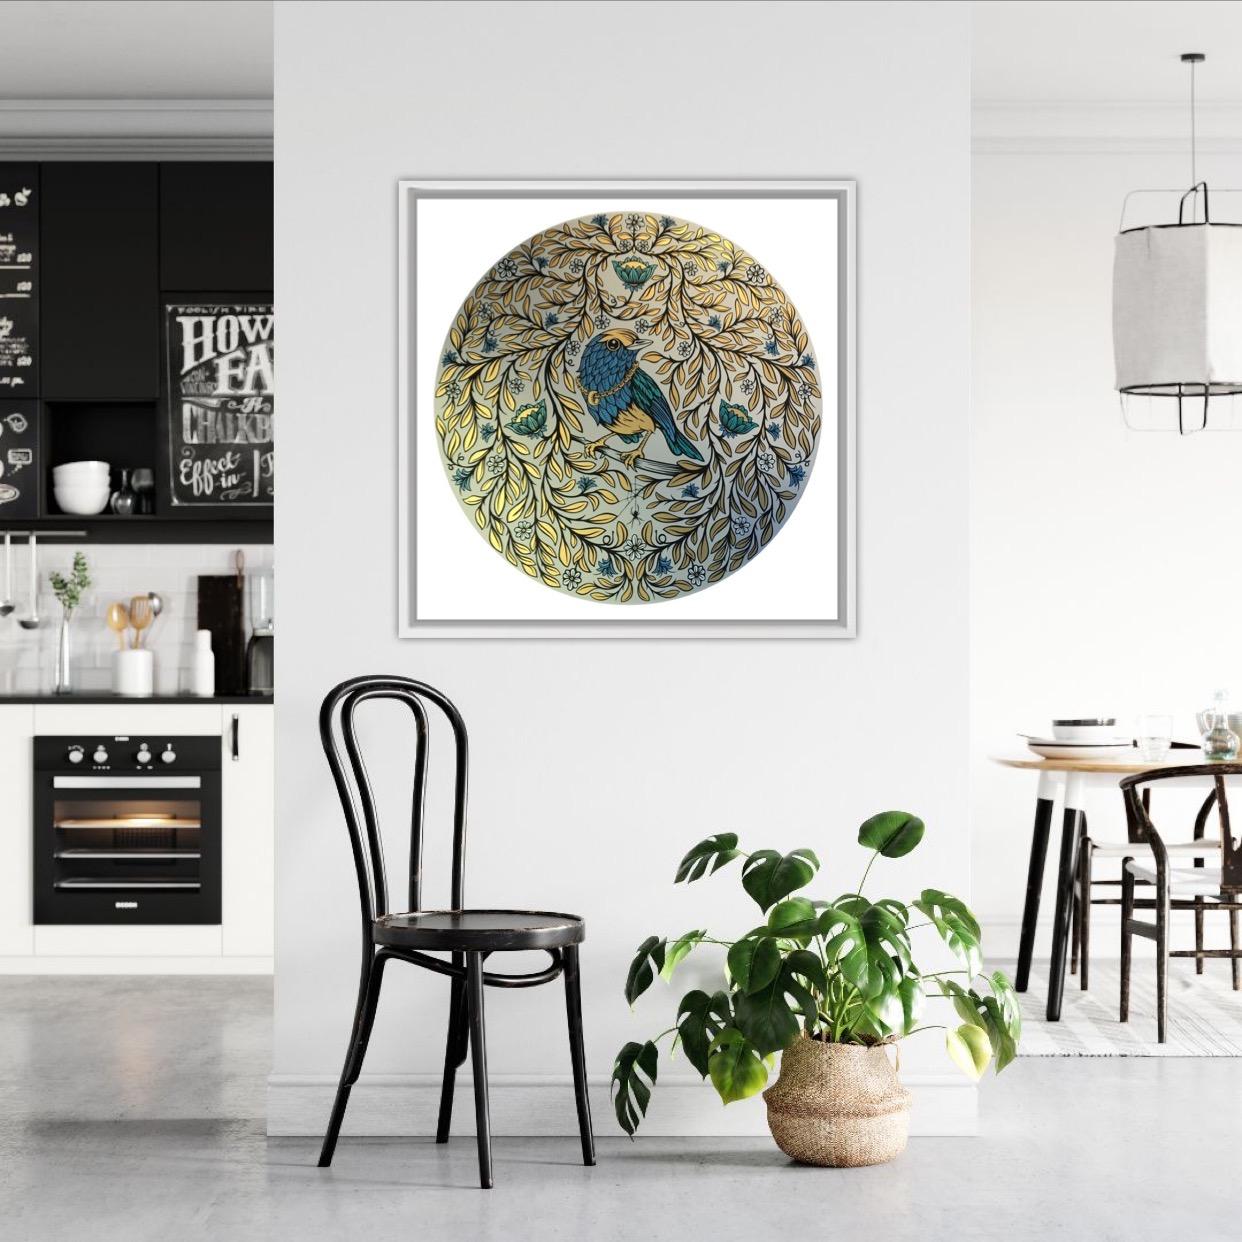 'Blue Bird' is a limited edition seven colour screen print by Andy Wilx printed in rich gold and pearlised inks. This work is in an edition of 25 and is sold unframed. This piece features a blue bird sat on a branch surrounded by gold leaves and